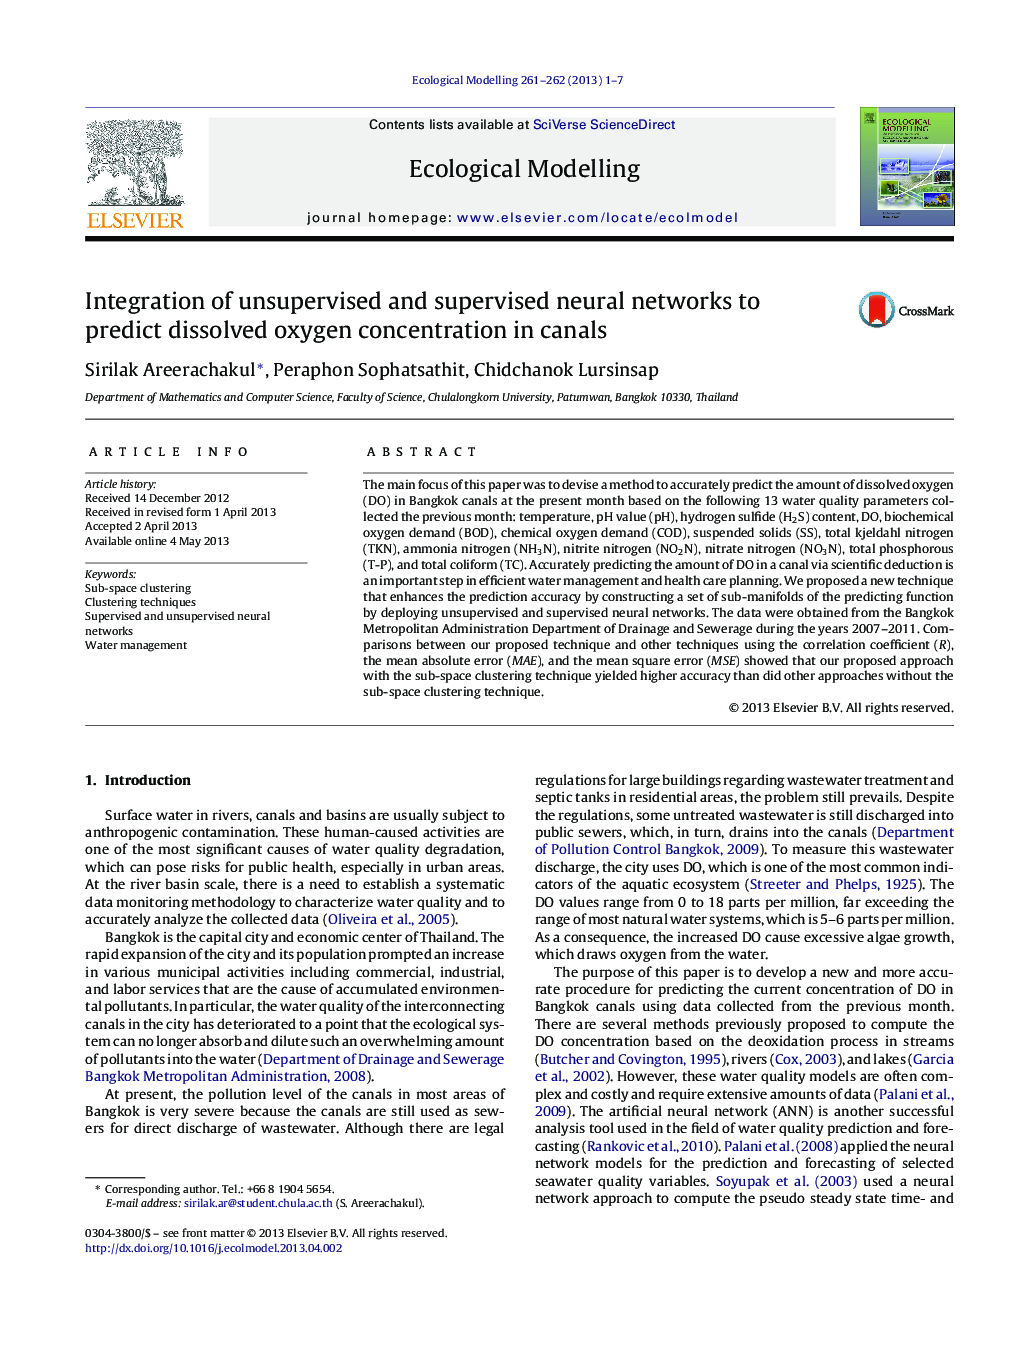 Integration of unsupervised and supervised neural networks to predict dissolved oxygen concentration in canals